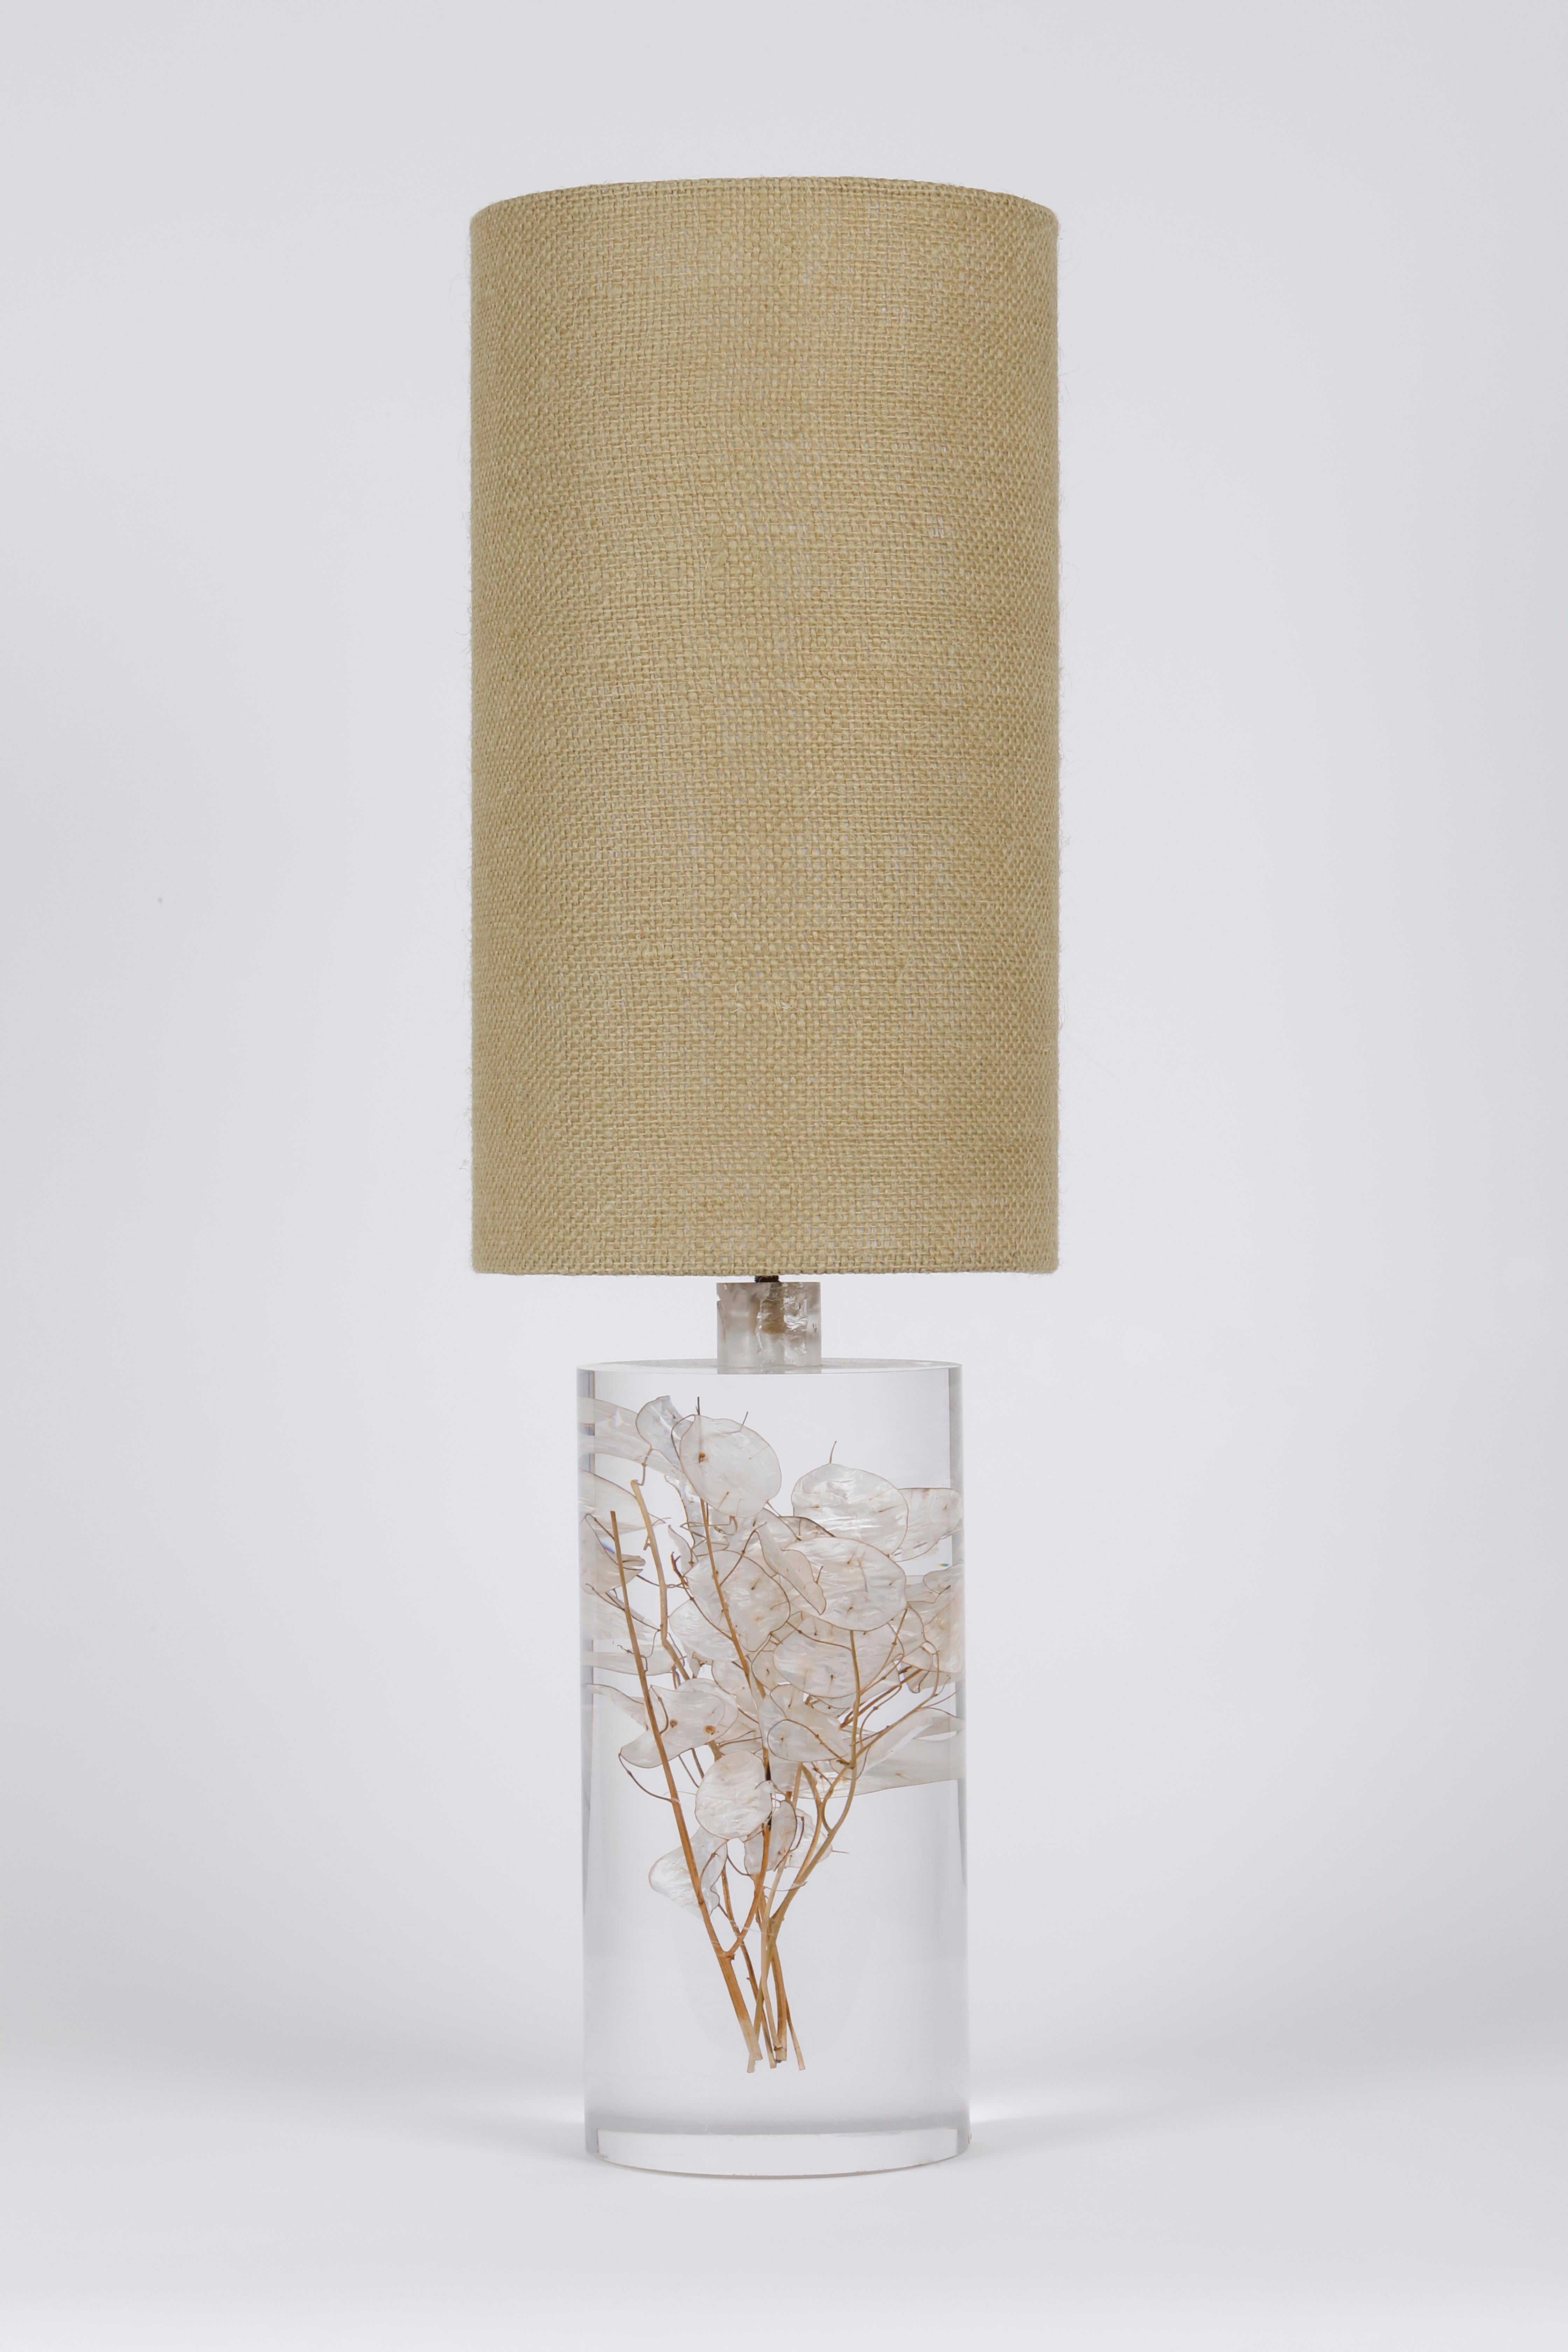 Tall resin lamp, 1970, France
Lunaria annua inlay
Height without lampshade